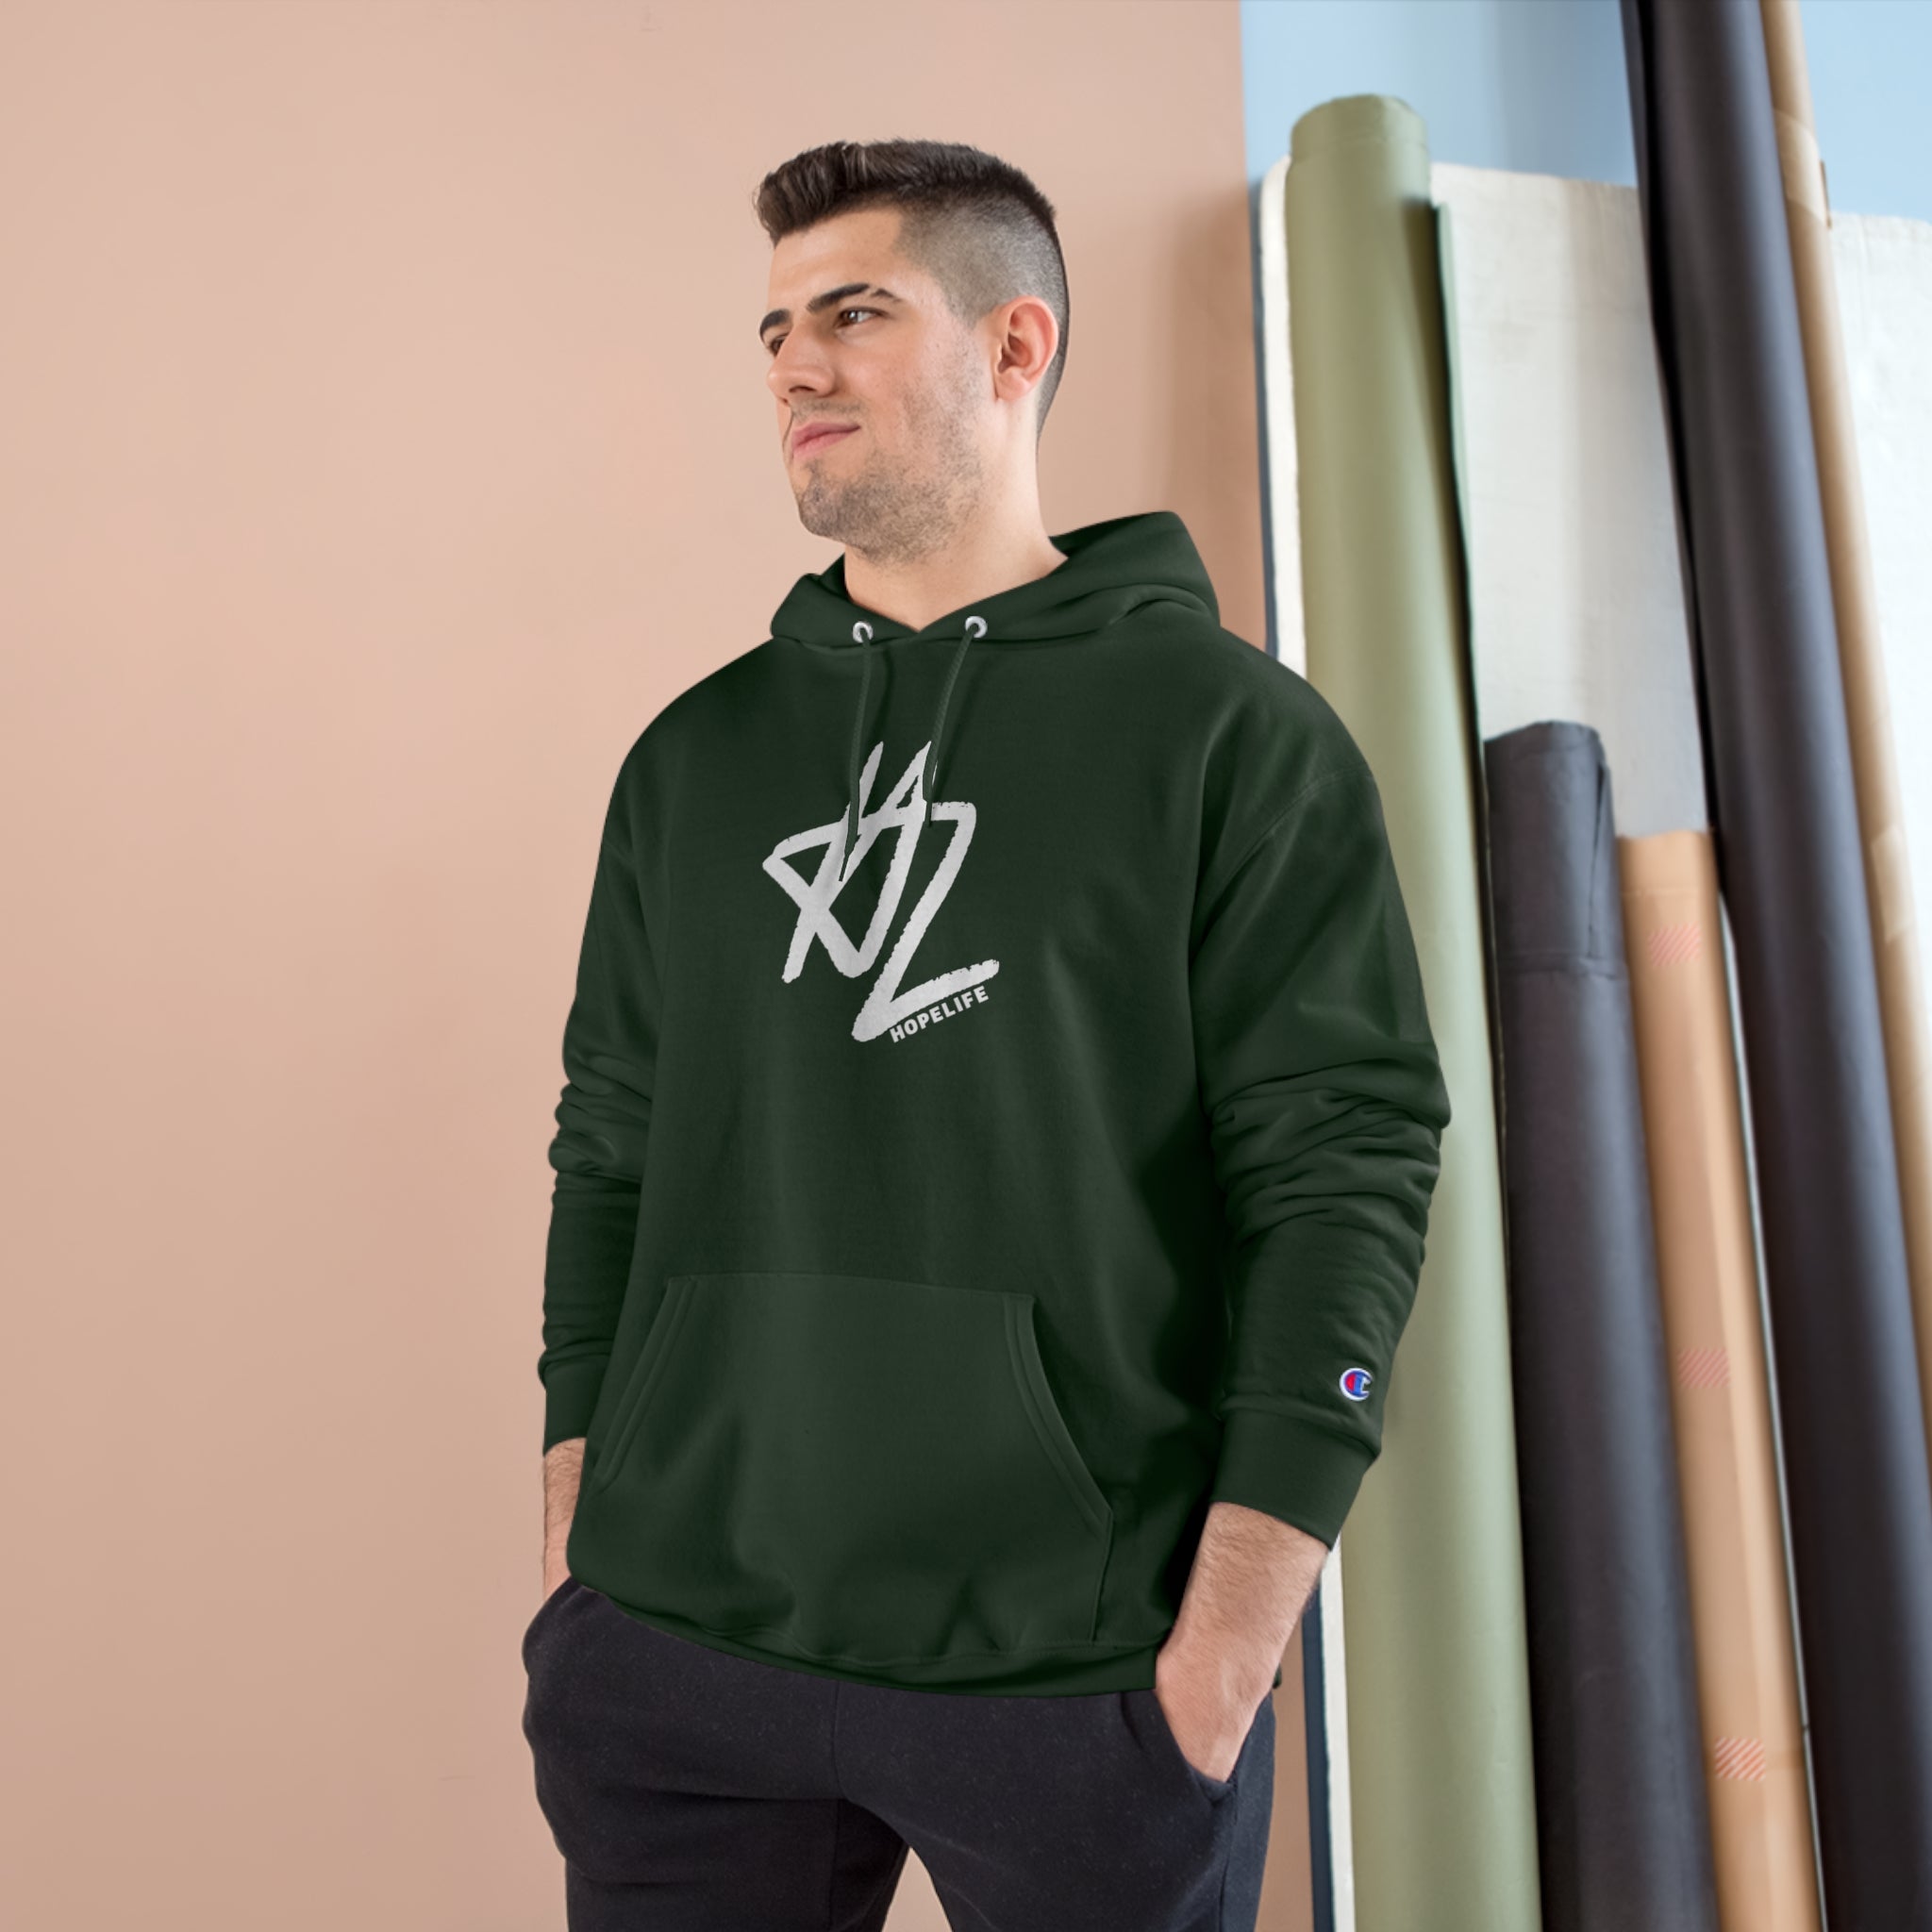 Pieces of Hope Champion Hoodie